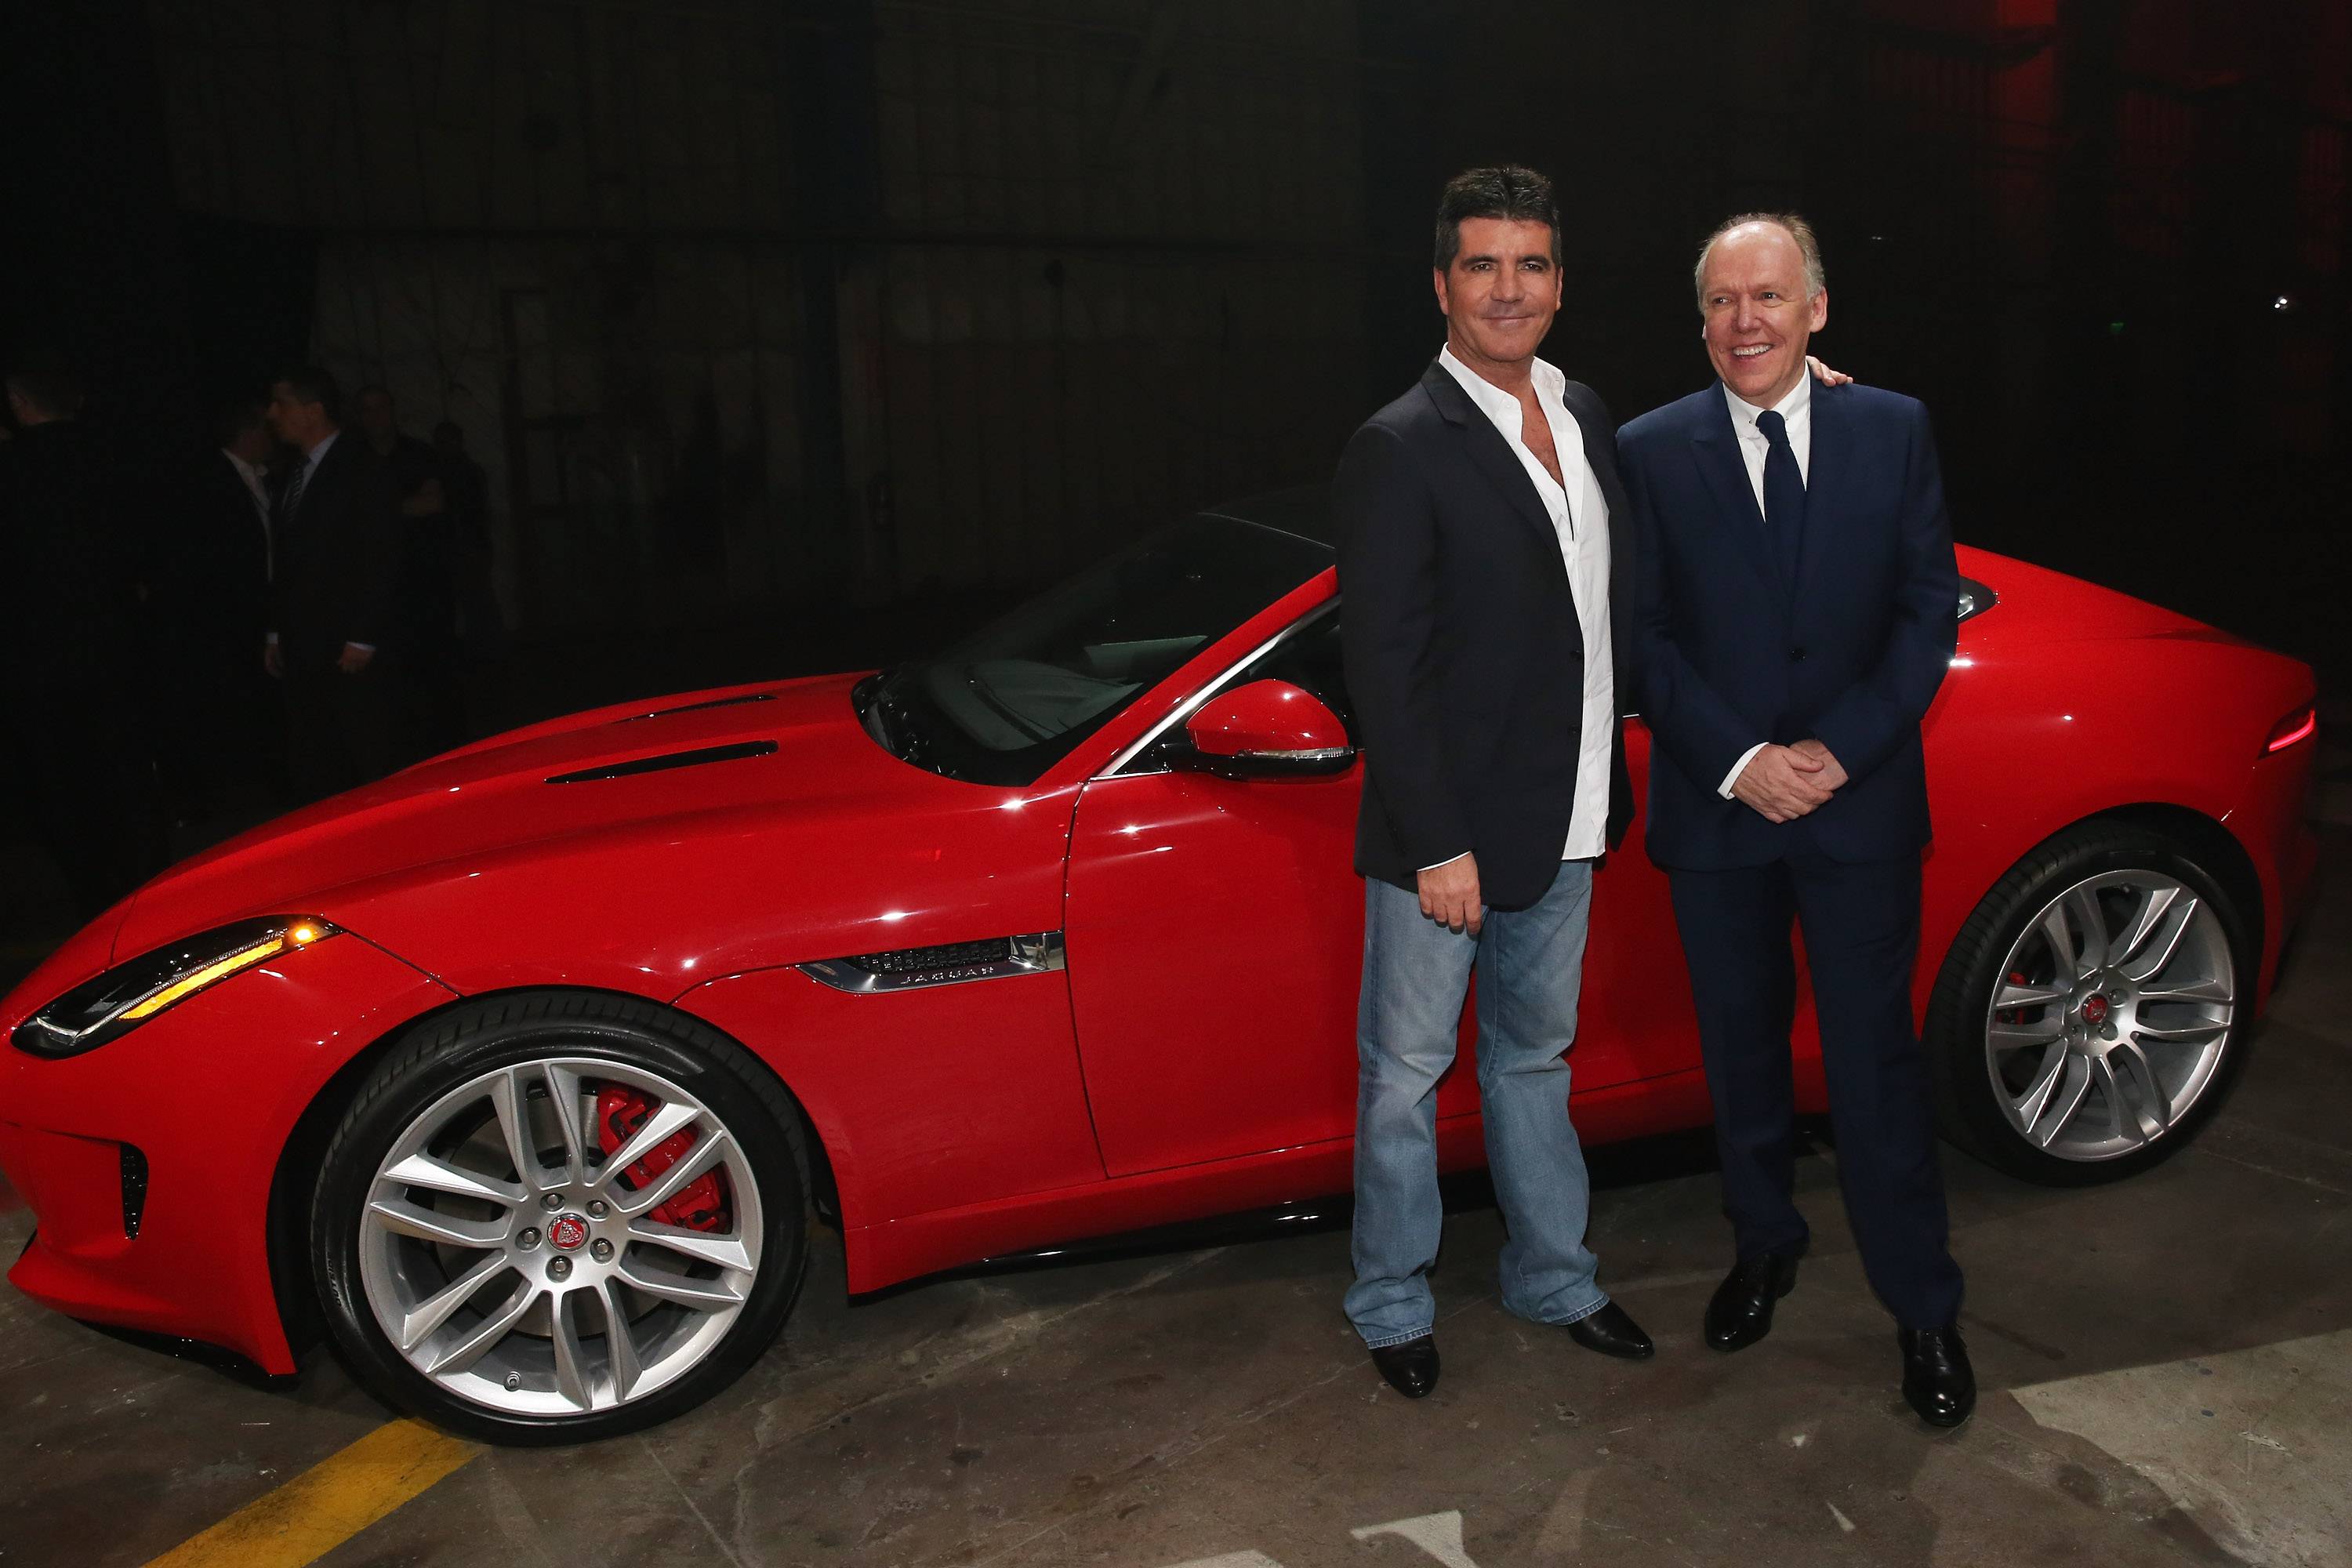 The All New Jaguar F-TYPE Coupe Makes High-Speed Debut At Exclusive VIP Event In LA